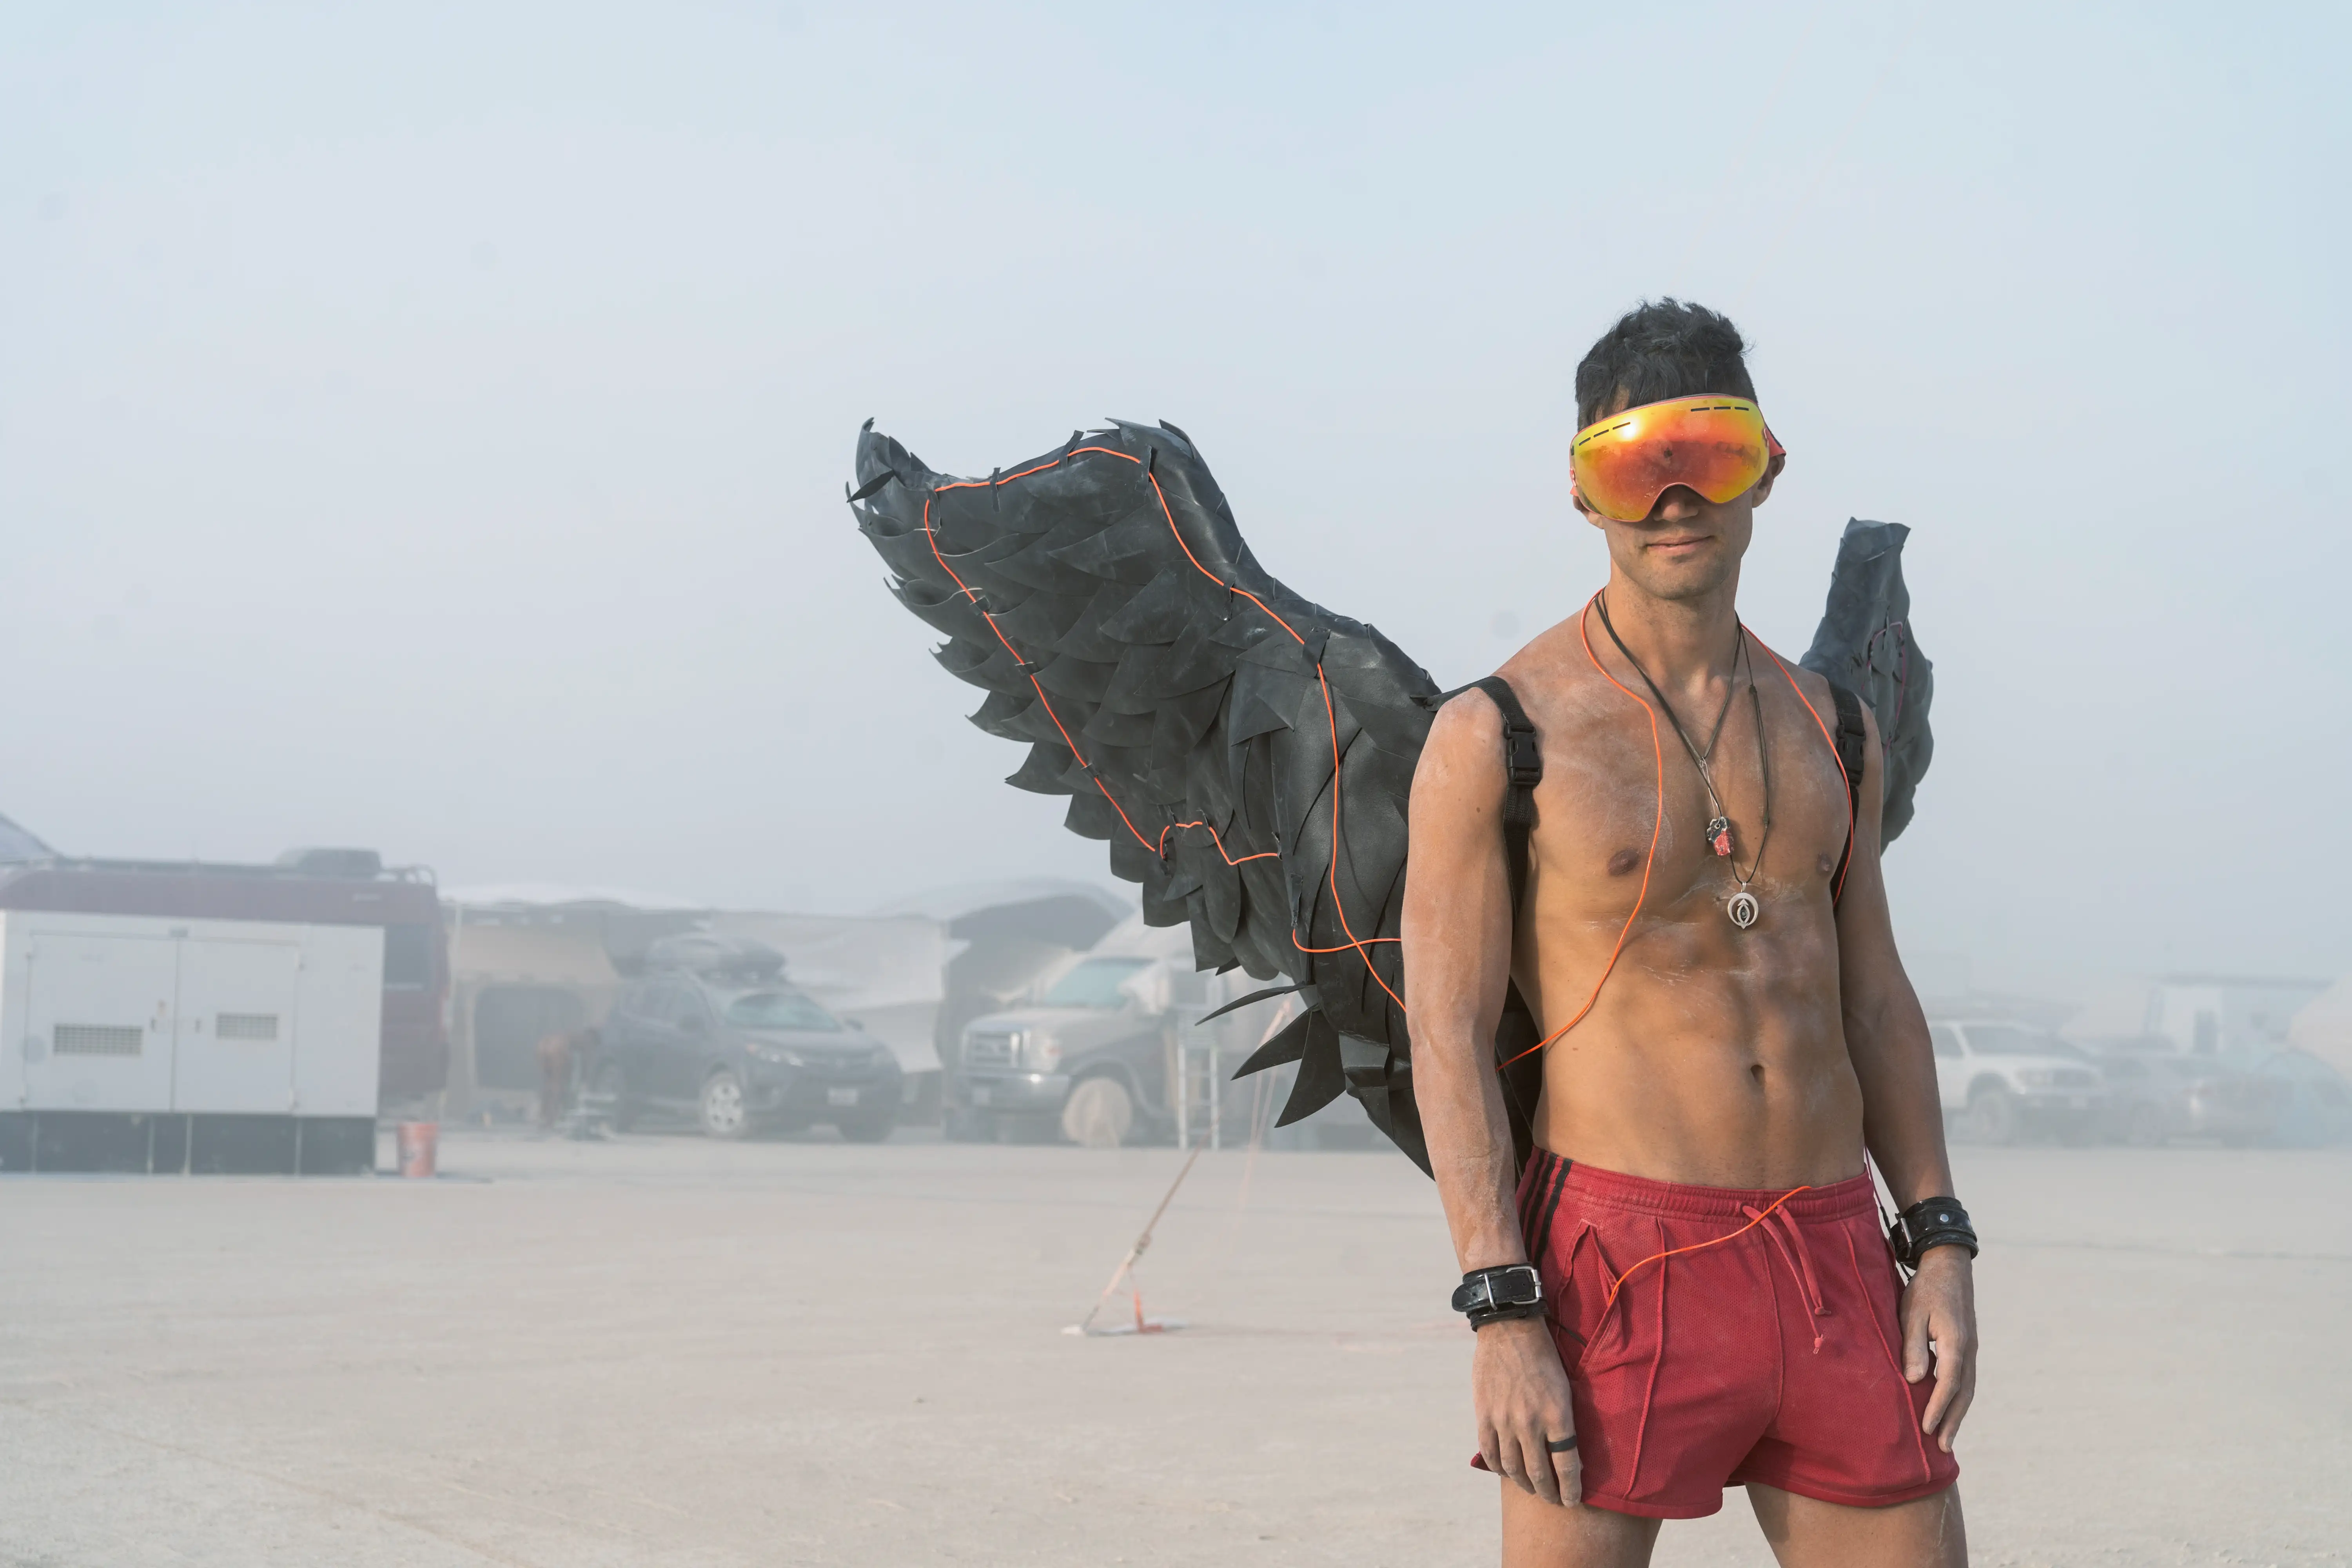 A muscular, shirtless man covered in dust in the desert of Burning Man while visibility is very low due to dust whiteouts. He is wearing giant black wings with El-wire for illumation, ski goggles, several necklaces and bracelets, and shorts.